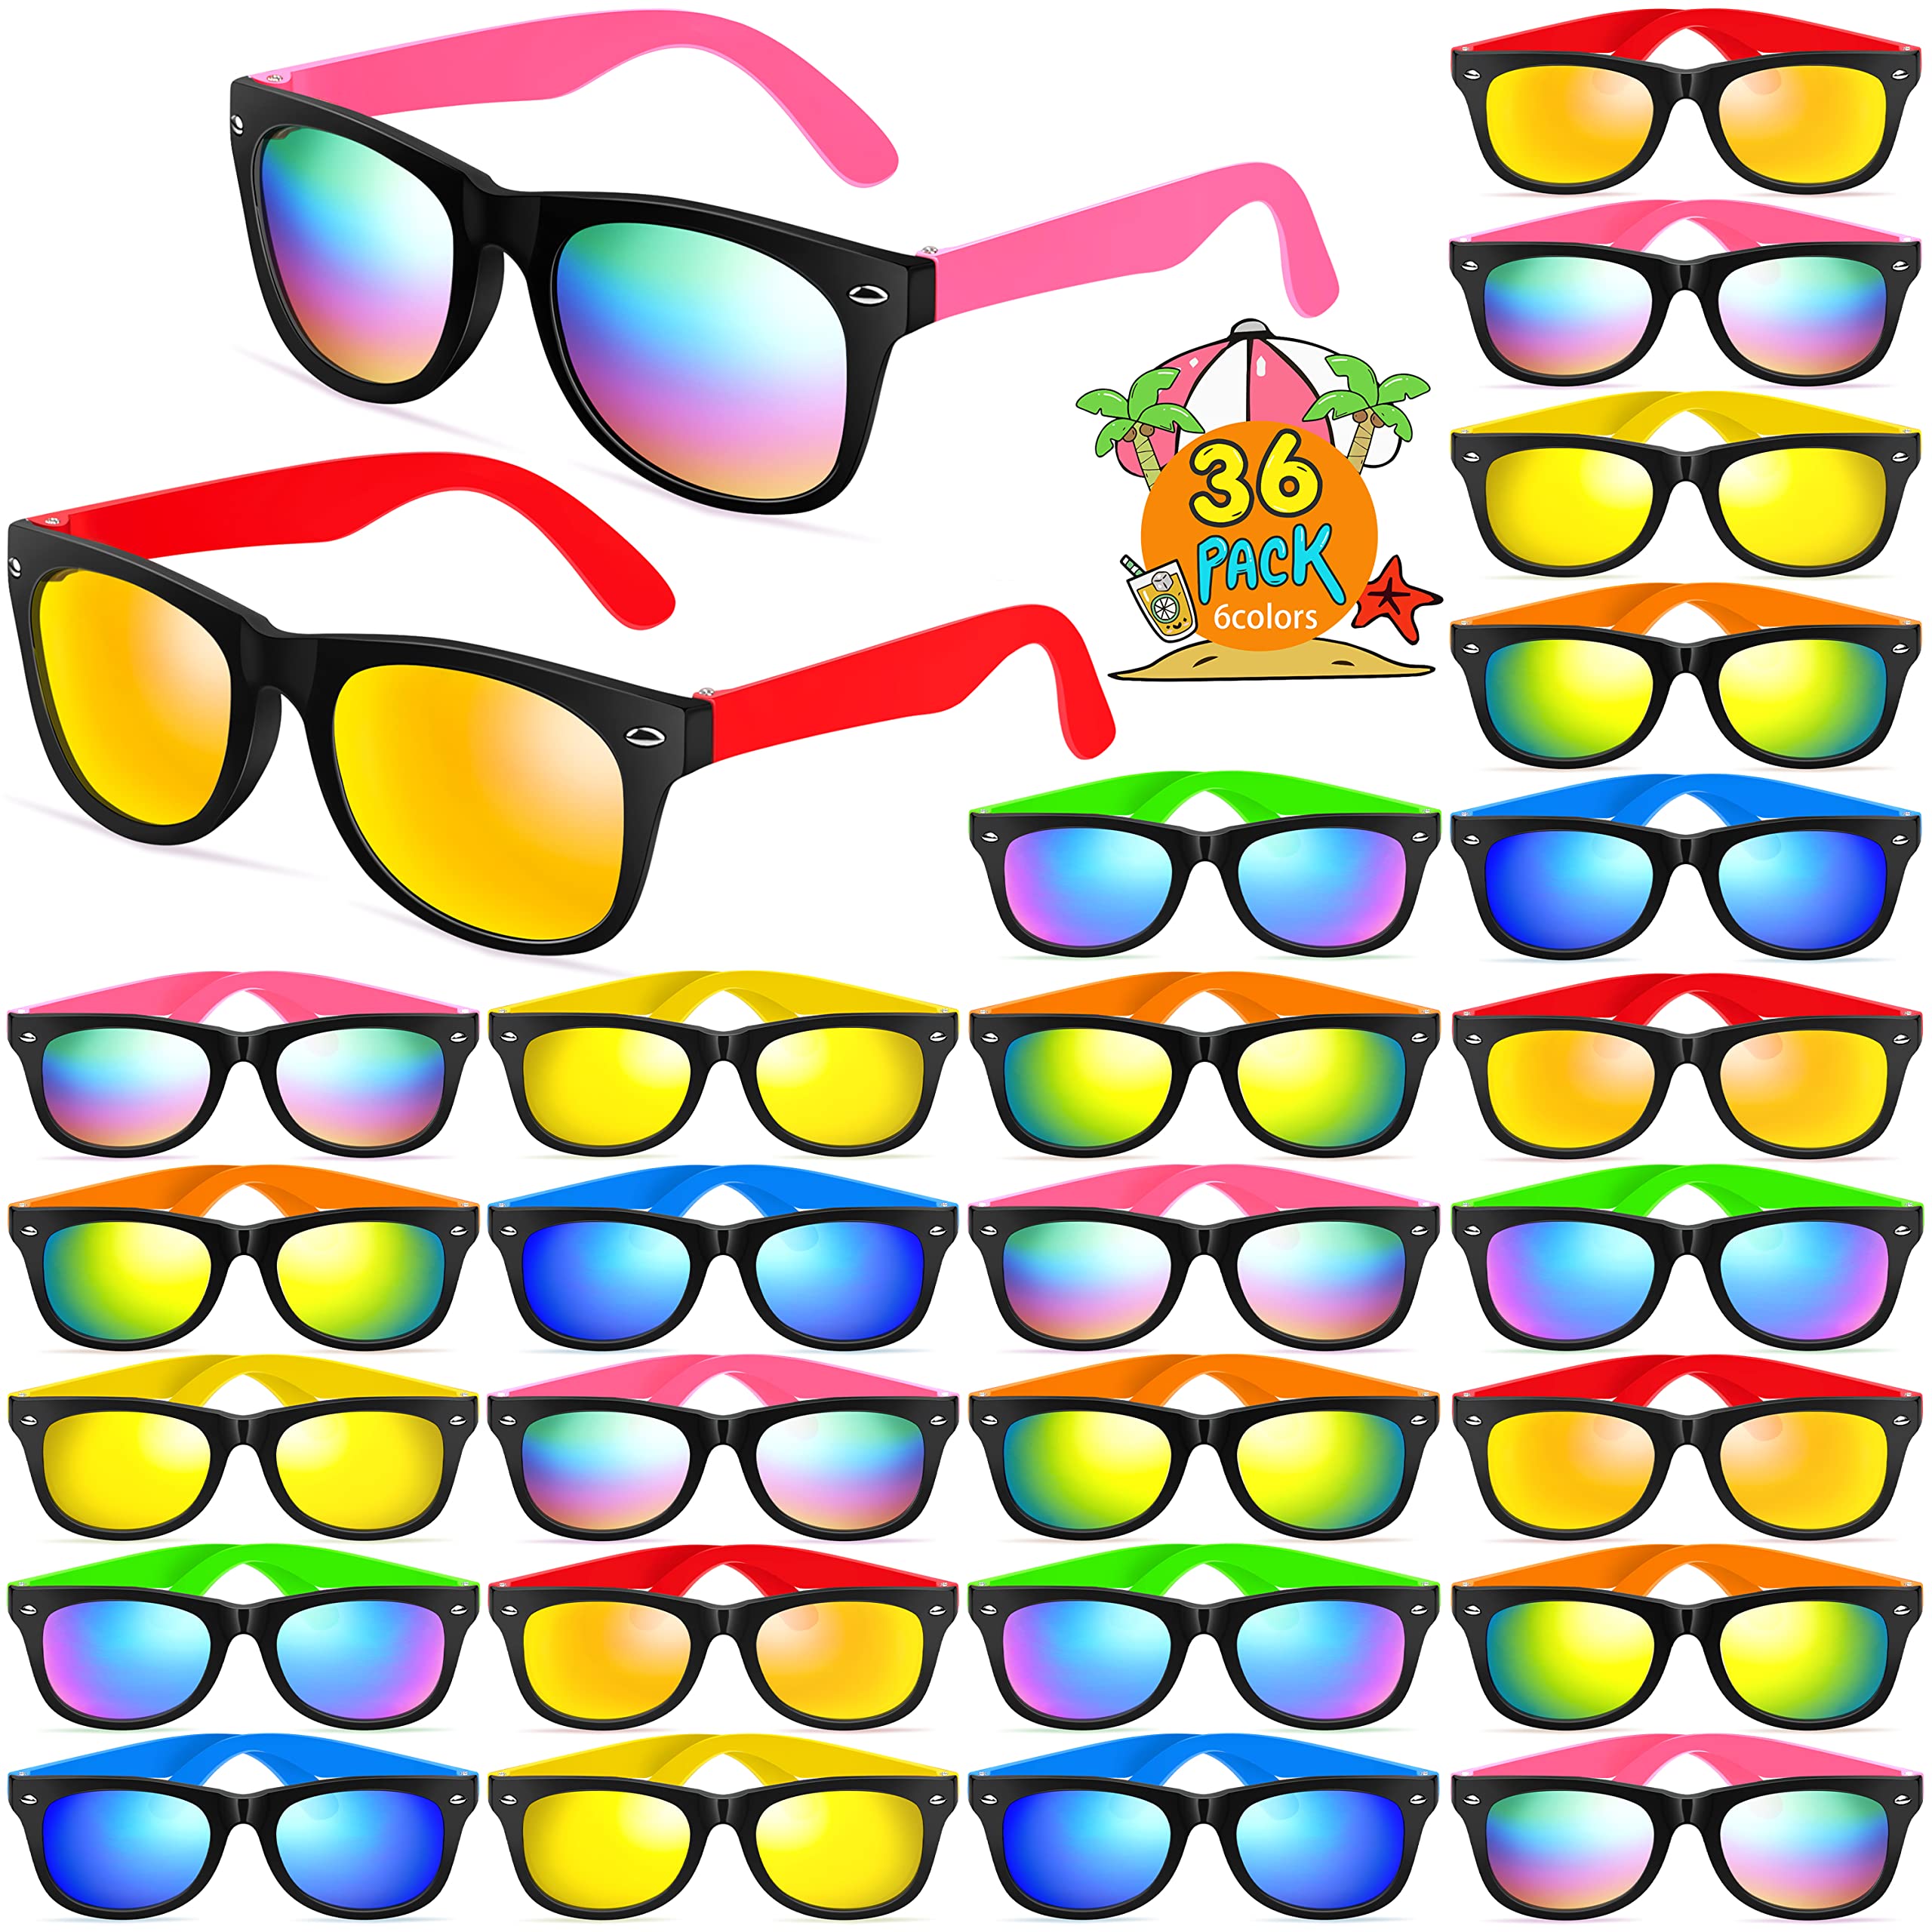 GINMIC Kids Sunglasses Bulk, 36 Pack Sunglasses Kids Party Favor, Boys and Girls, Pool Toys, Summer Toys, Party Toys, Goody Bag Stuffers, Gift for Birthday Party Supplies